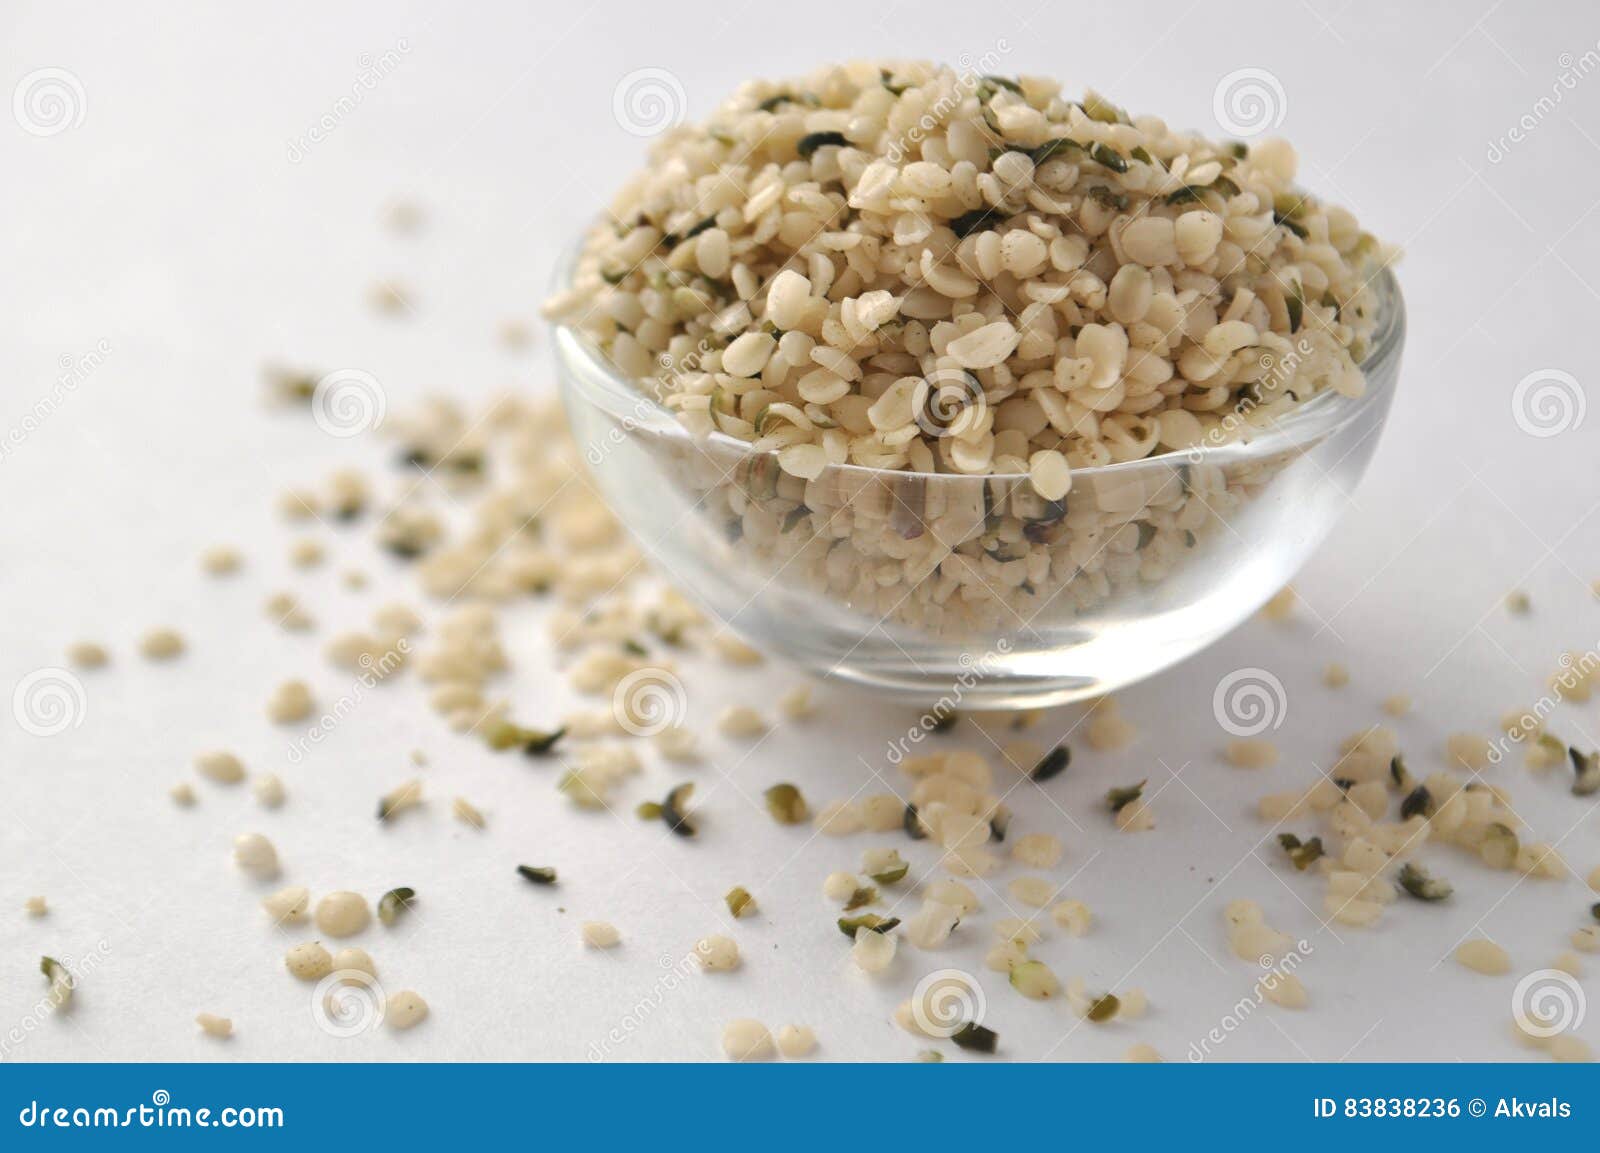 crushed hemp hearts or seeds - natural and nutritious dietary supplement suitable for vegans